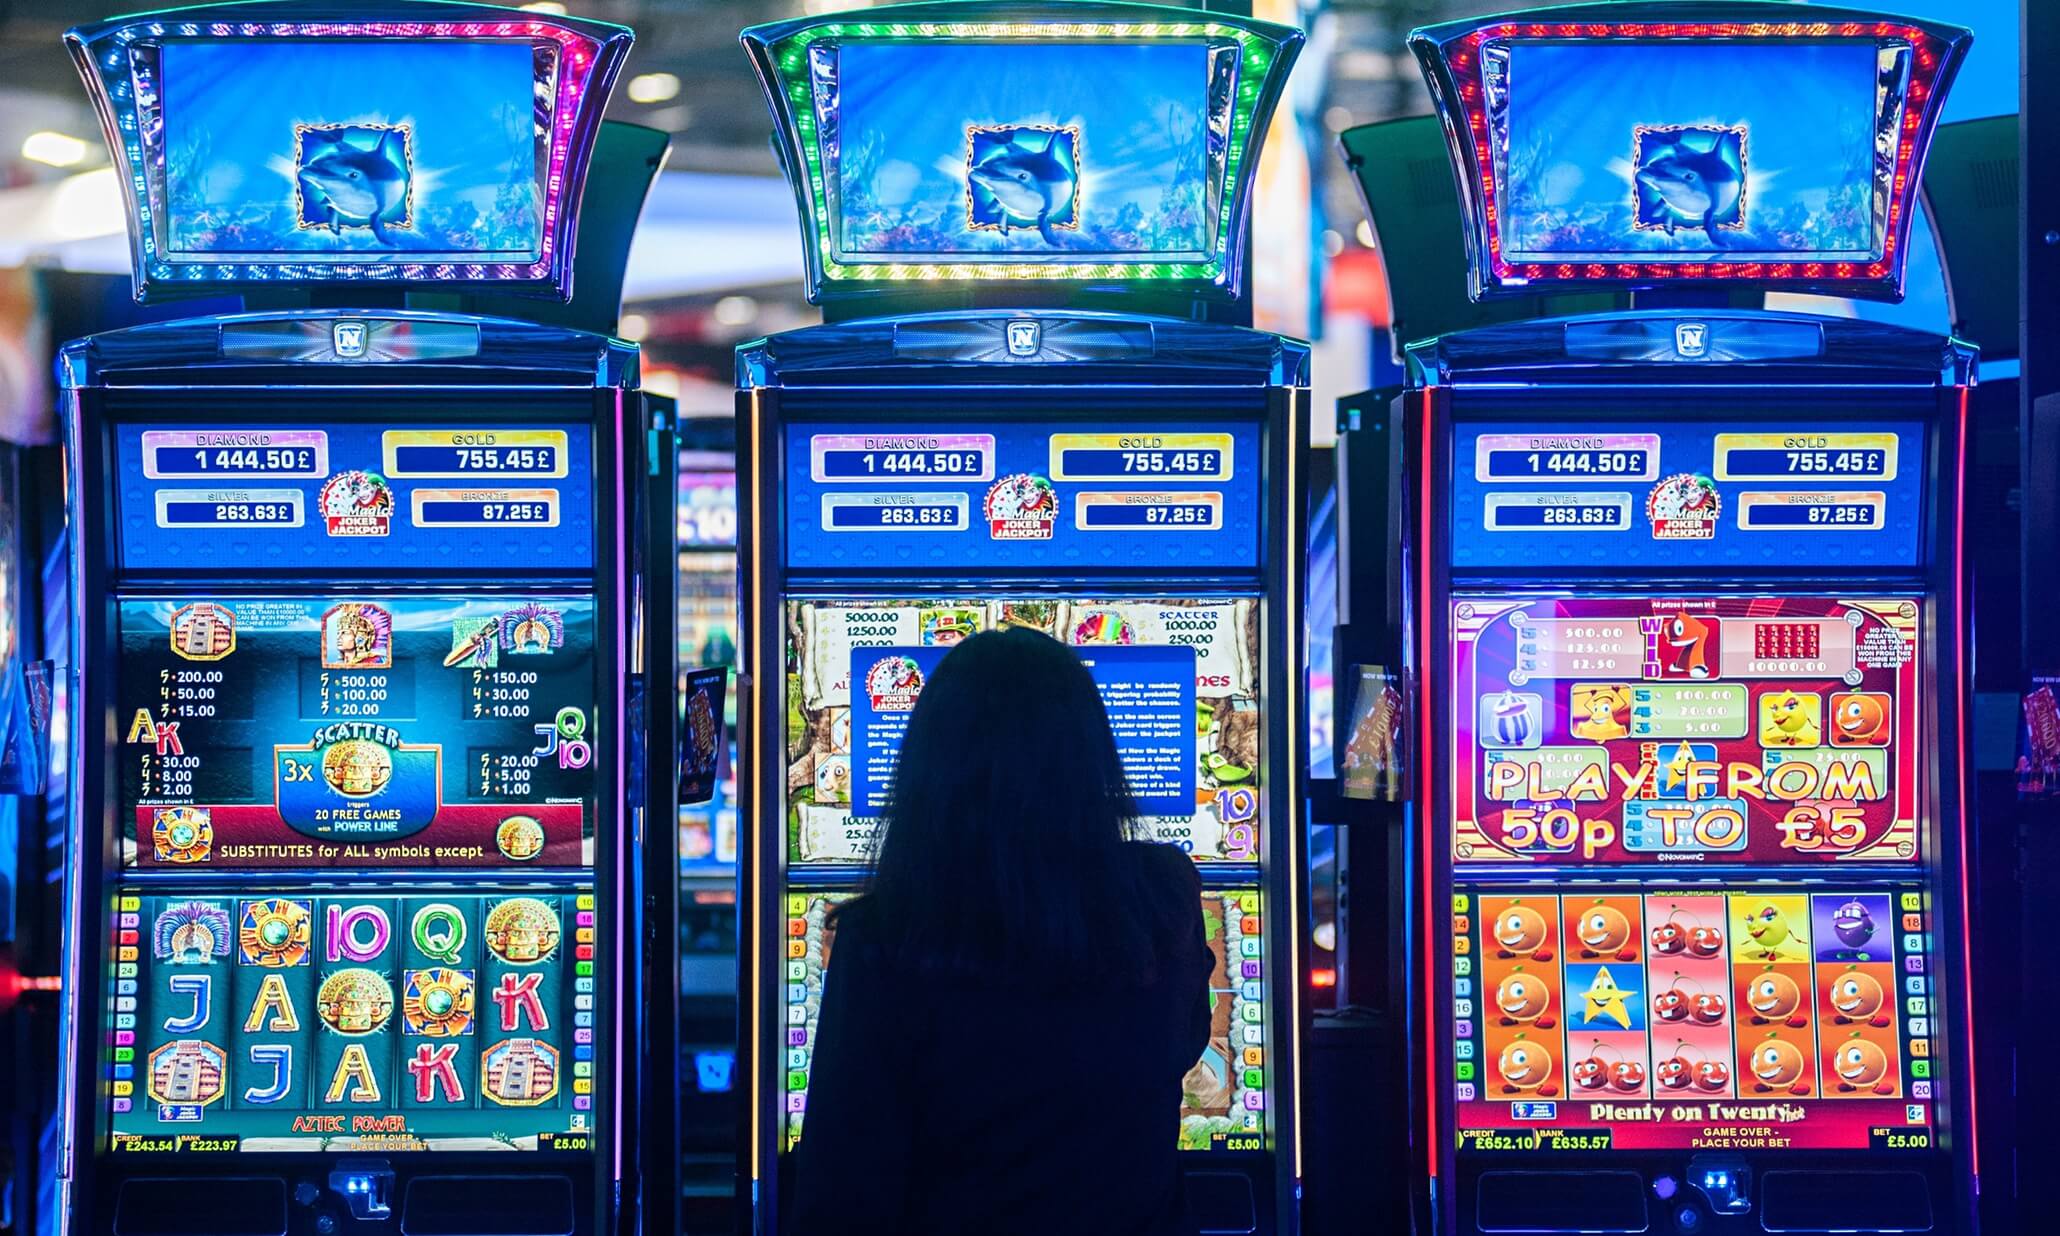 Real money cashless slots are becoming a trend in the industry